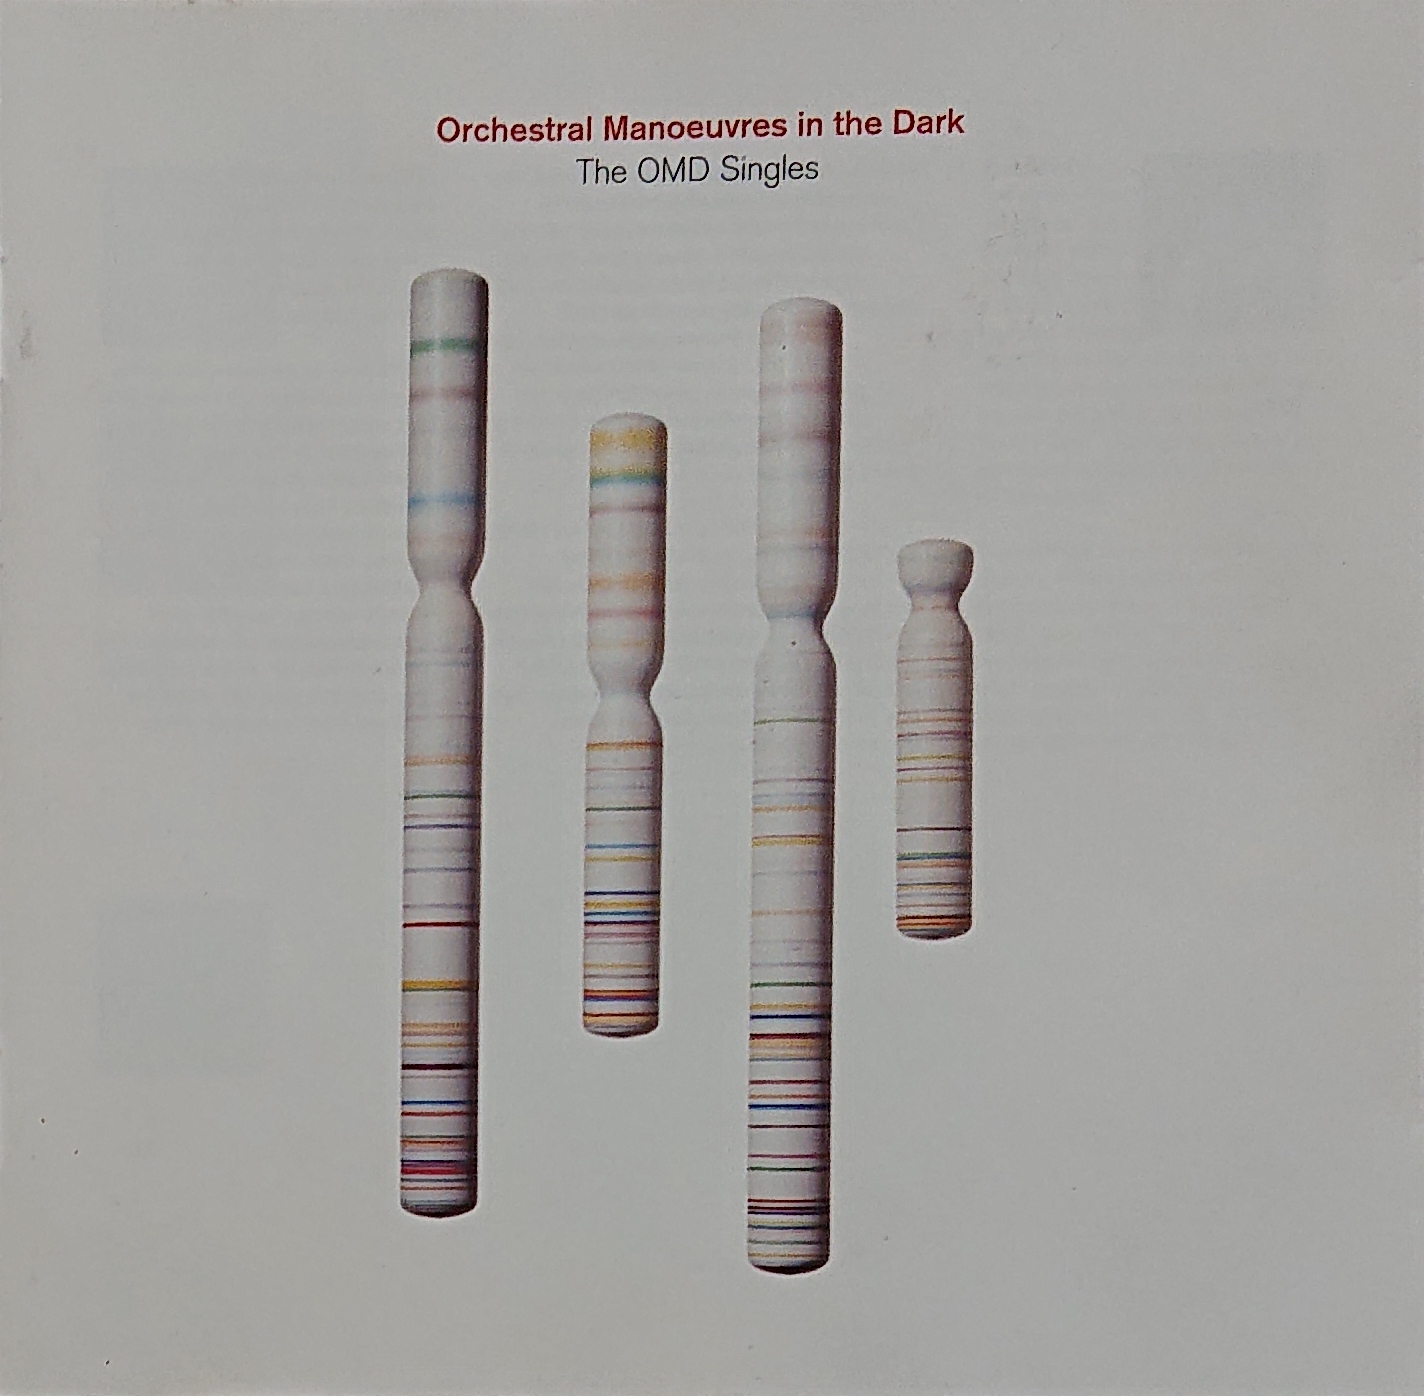 Picture of CDV 2859 The OMD singles by artist Orchestral Manoeuvres in the Dark